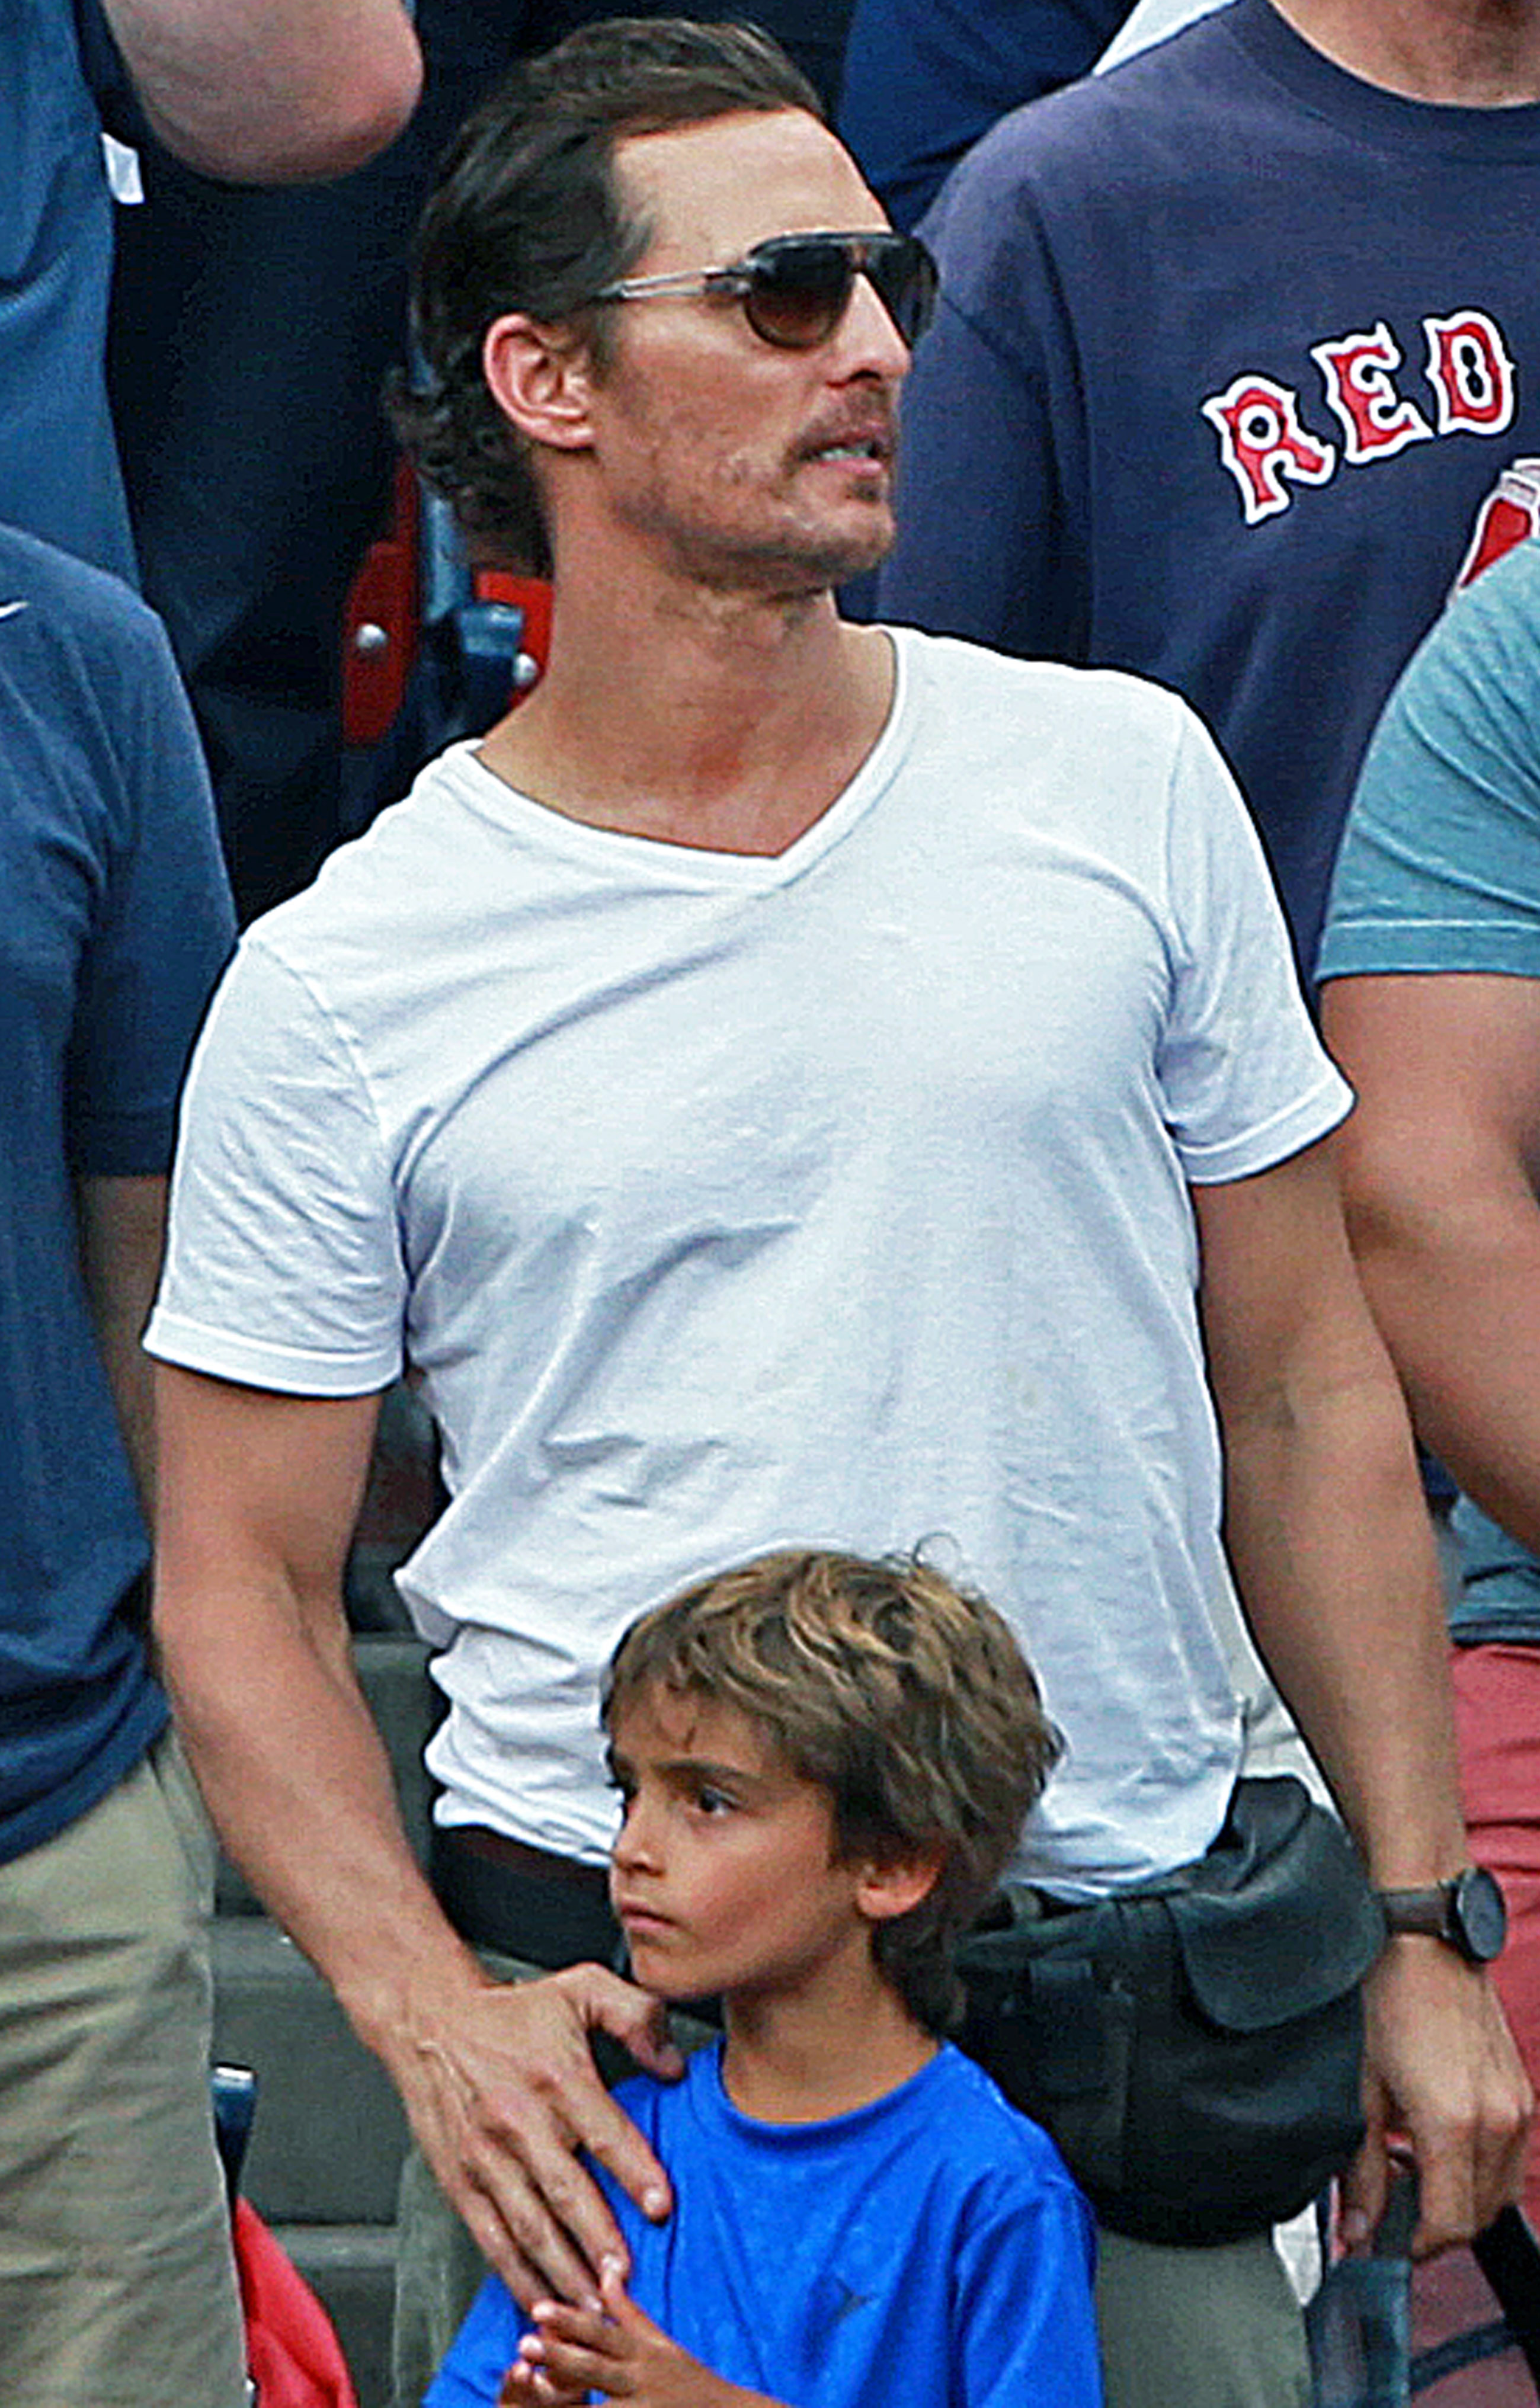 Actor Matthew McConaughey stands for the national anthem at the Red Sox game at Fenway Park on August 17, 2014. (Photo by Jim Davis/The Boston Globe via Getty Images) (Boston Globe—Boston Globe via Getty Images)